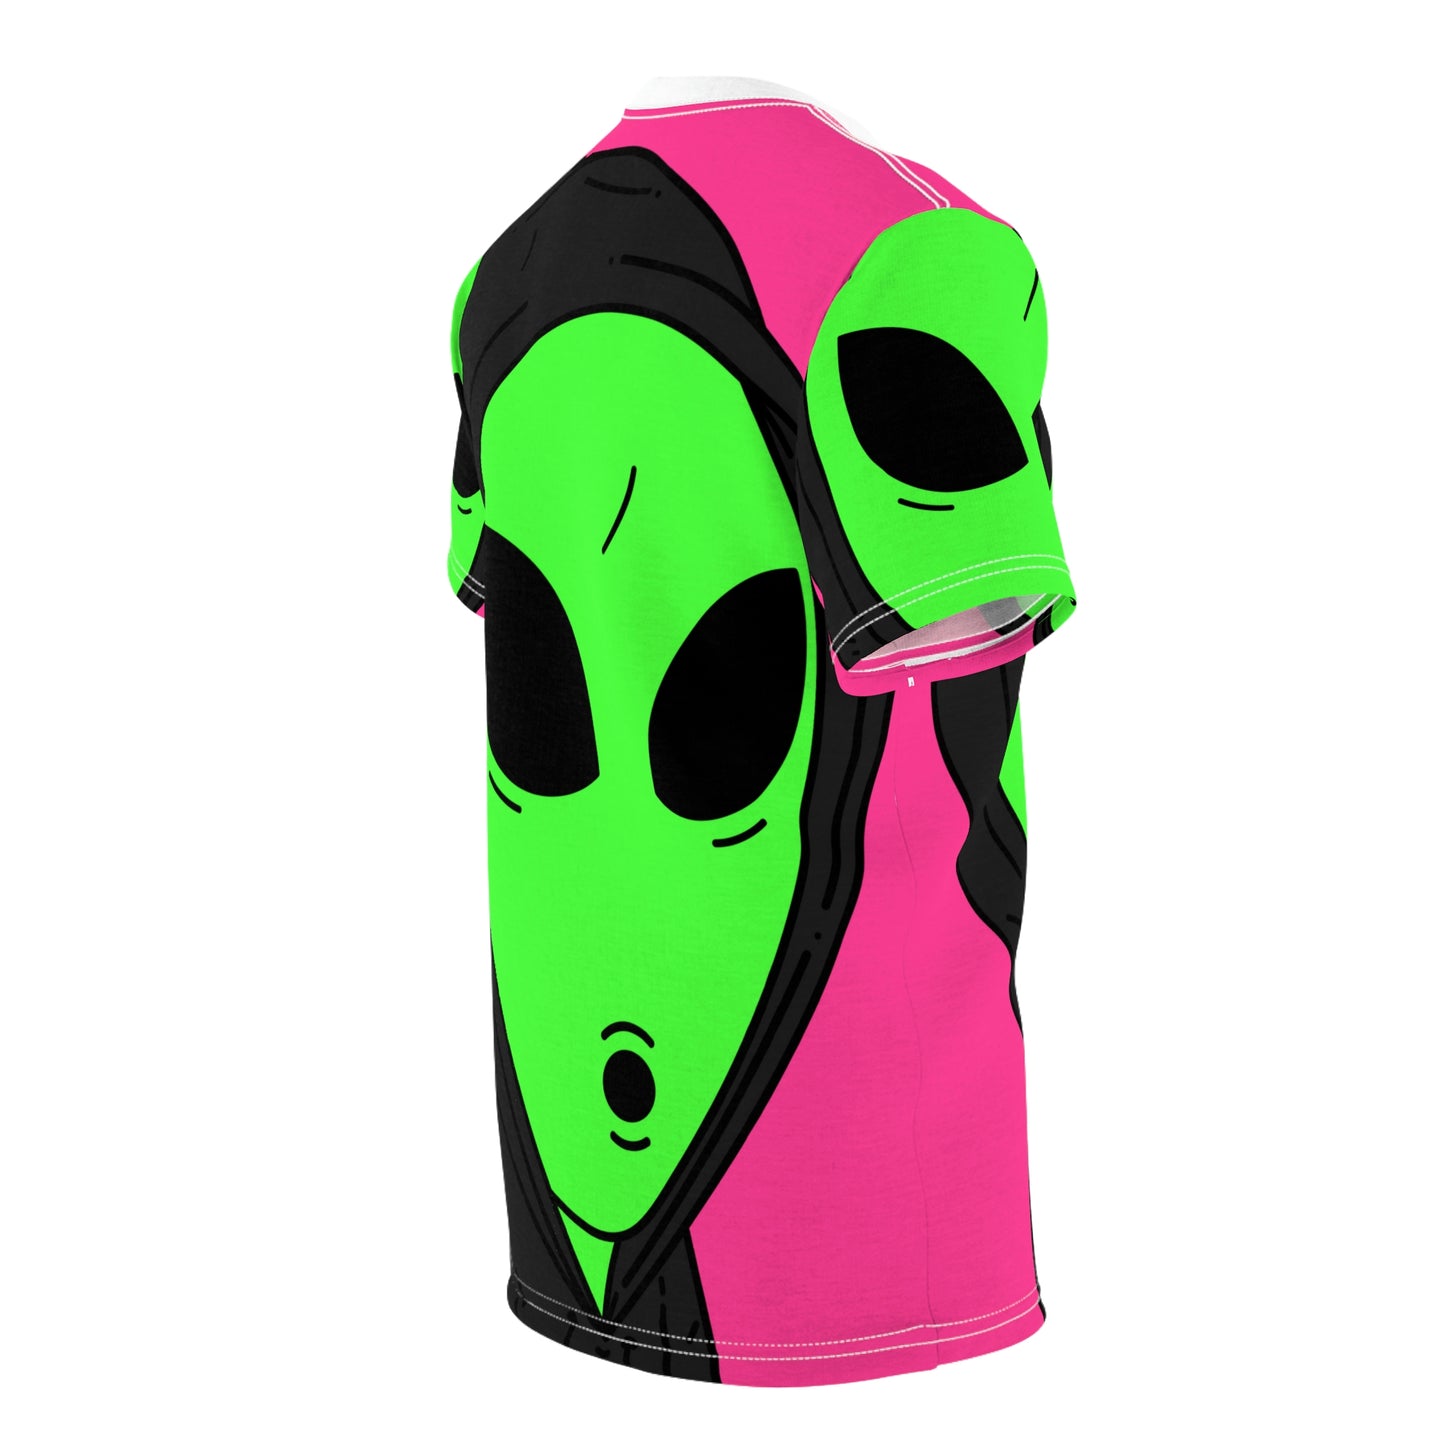 Anonymous Anon Alien Visitor Character Cartoon Unisex AOP Cut & Sew Tee